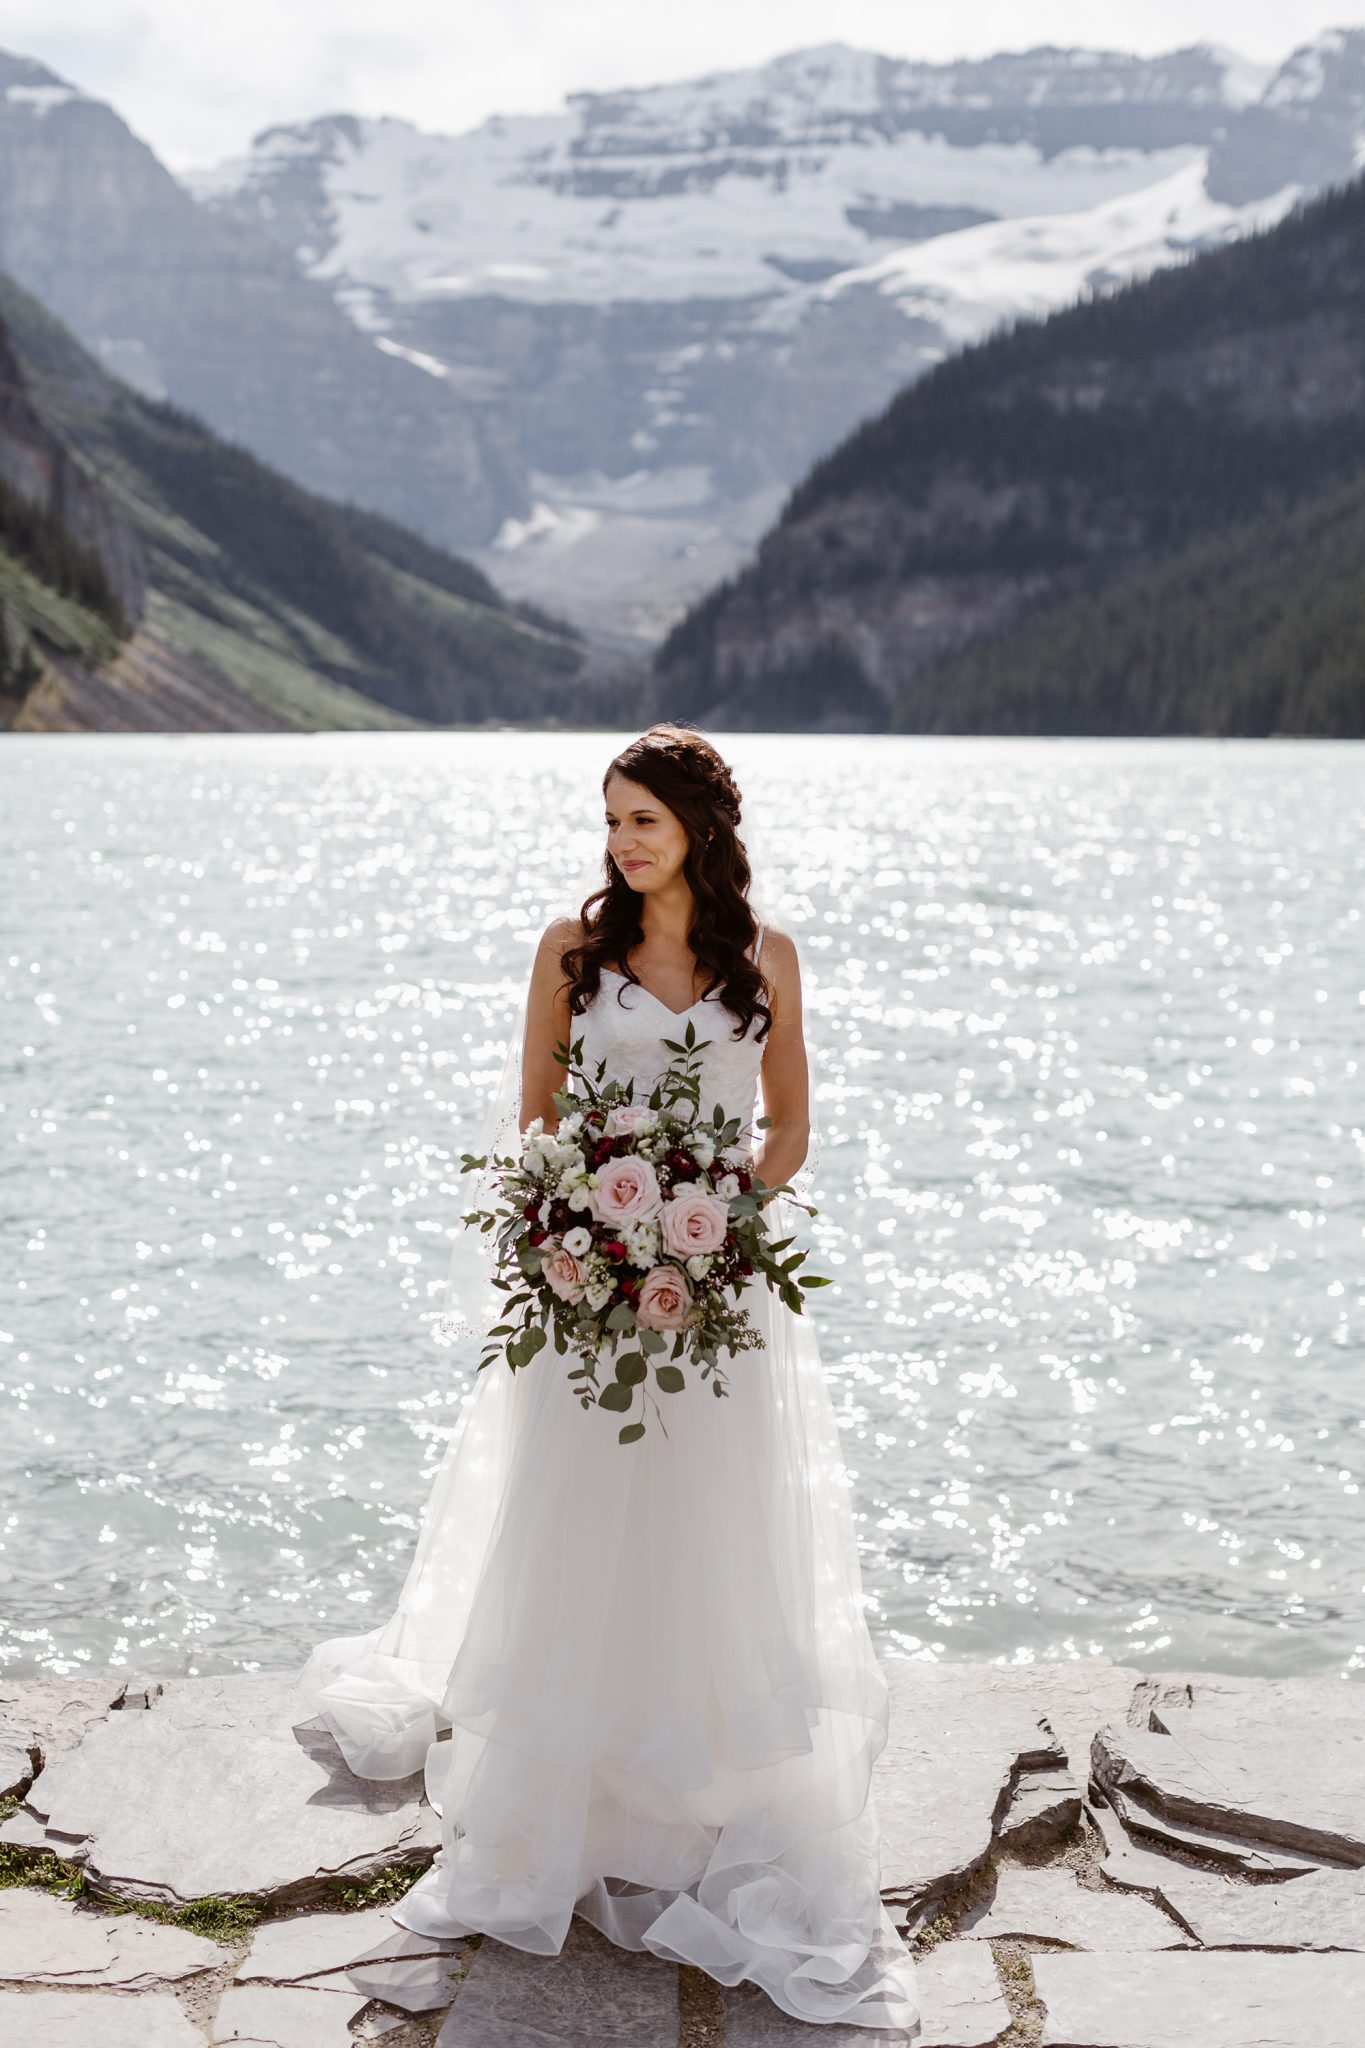 This Couple Ended up Loving Their Downsized Wedding at Fairmont Lake Louise - bridal style, mountain wedding, burgundy bouquet